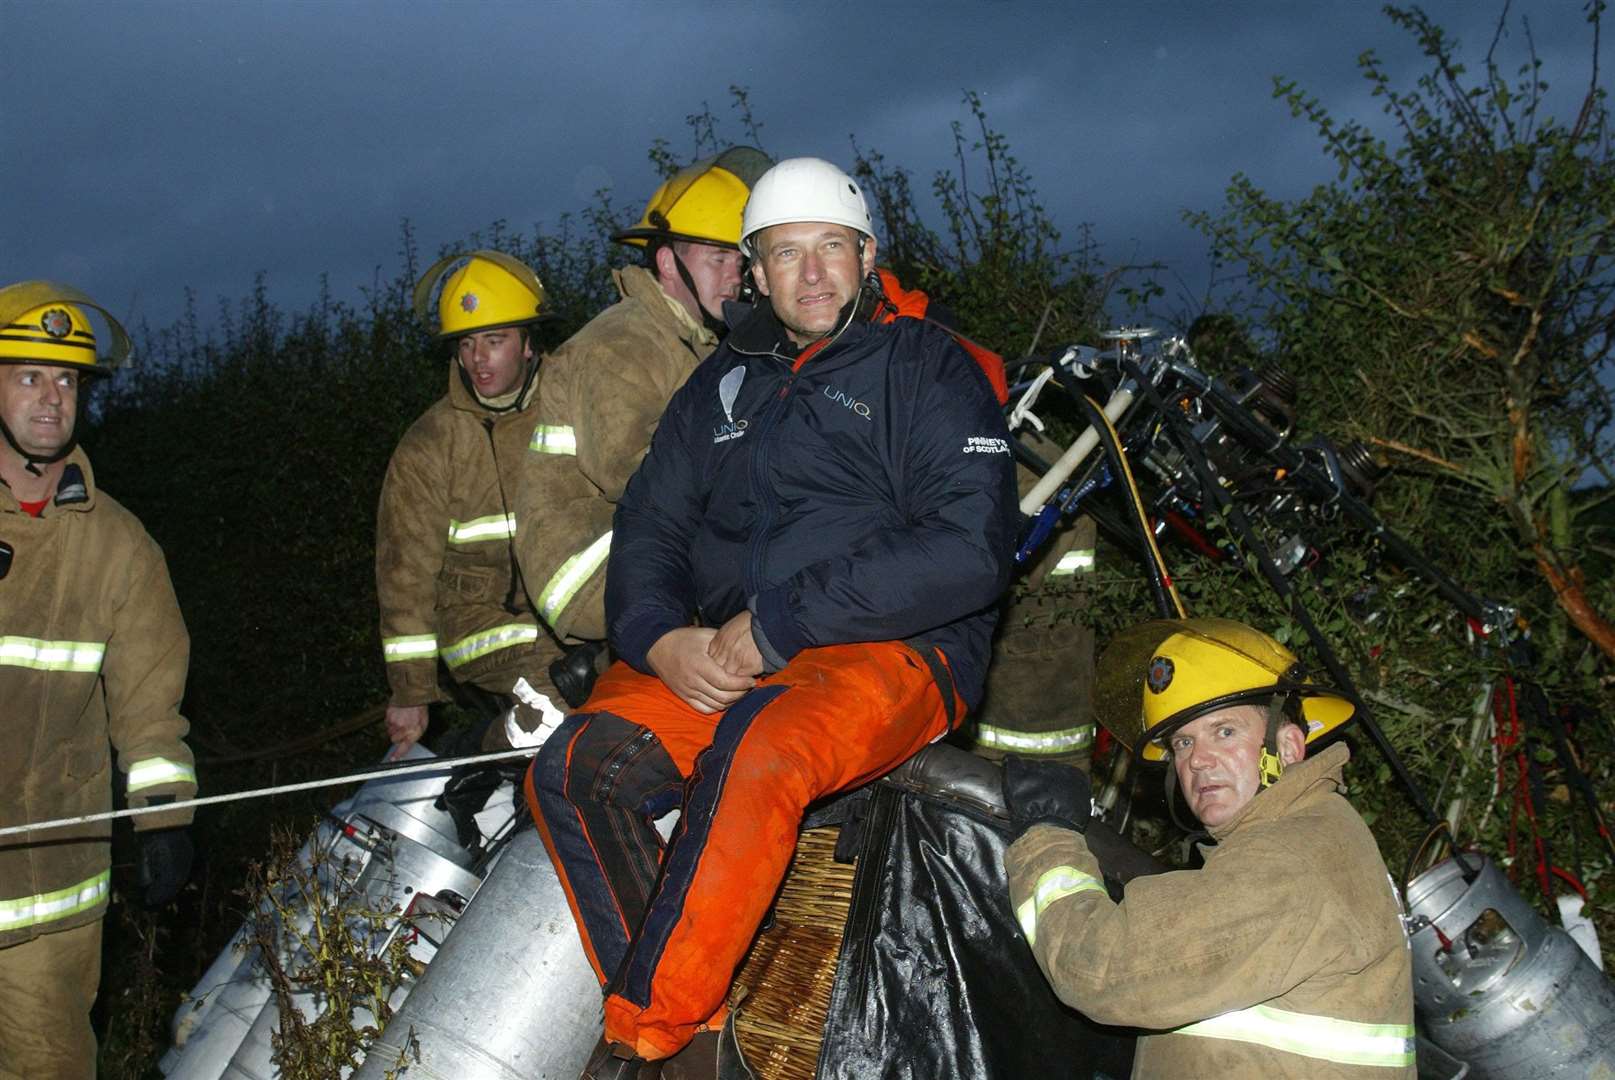 British adventurer David Hempleman-Adams after landing safely in 2003 after becoming the first person to cross the Atlantic solo in an open wicker-basket balloon (PA)